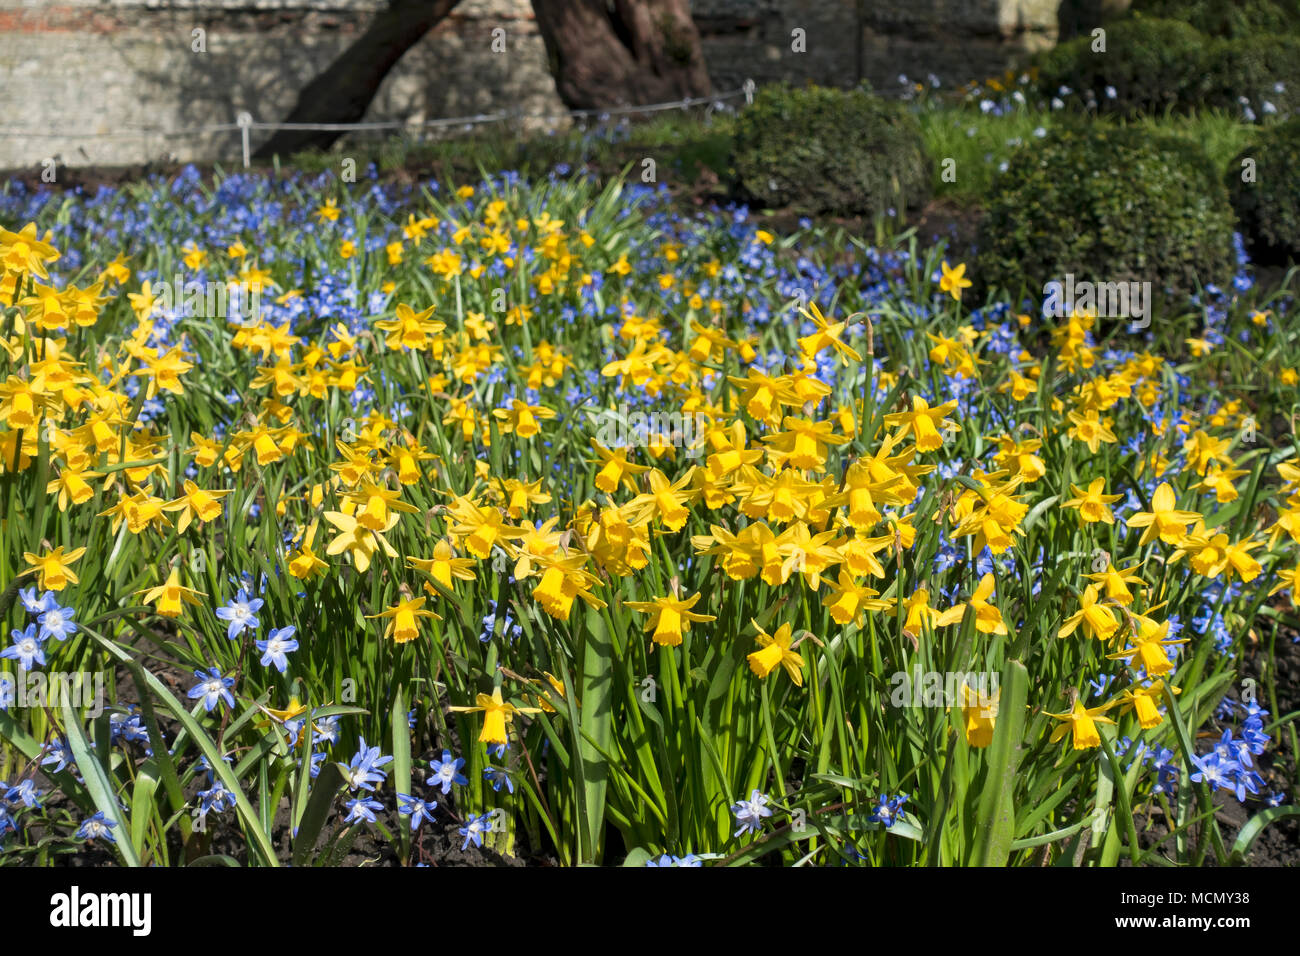 Yellow narcissi daffodils and blue chionodoxa flowers flowering plants in spring England UK United Kingdom GB Great Britain Stock Photo